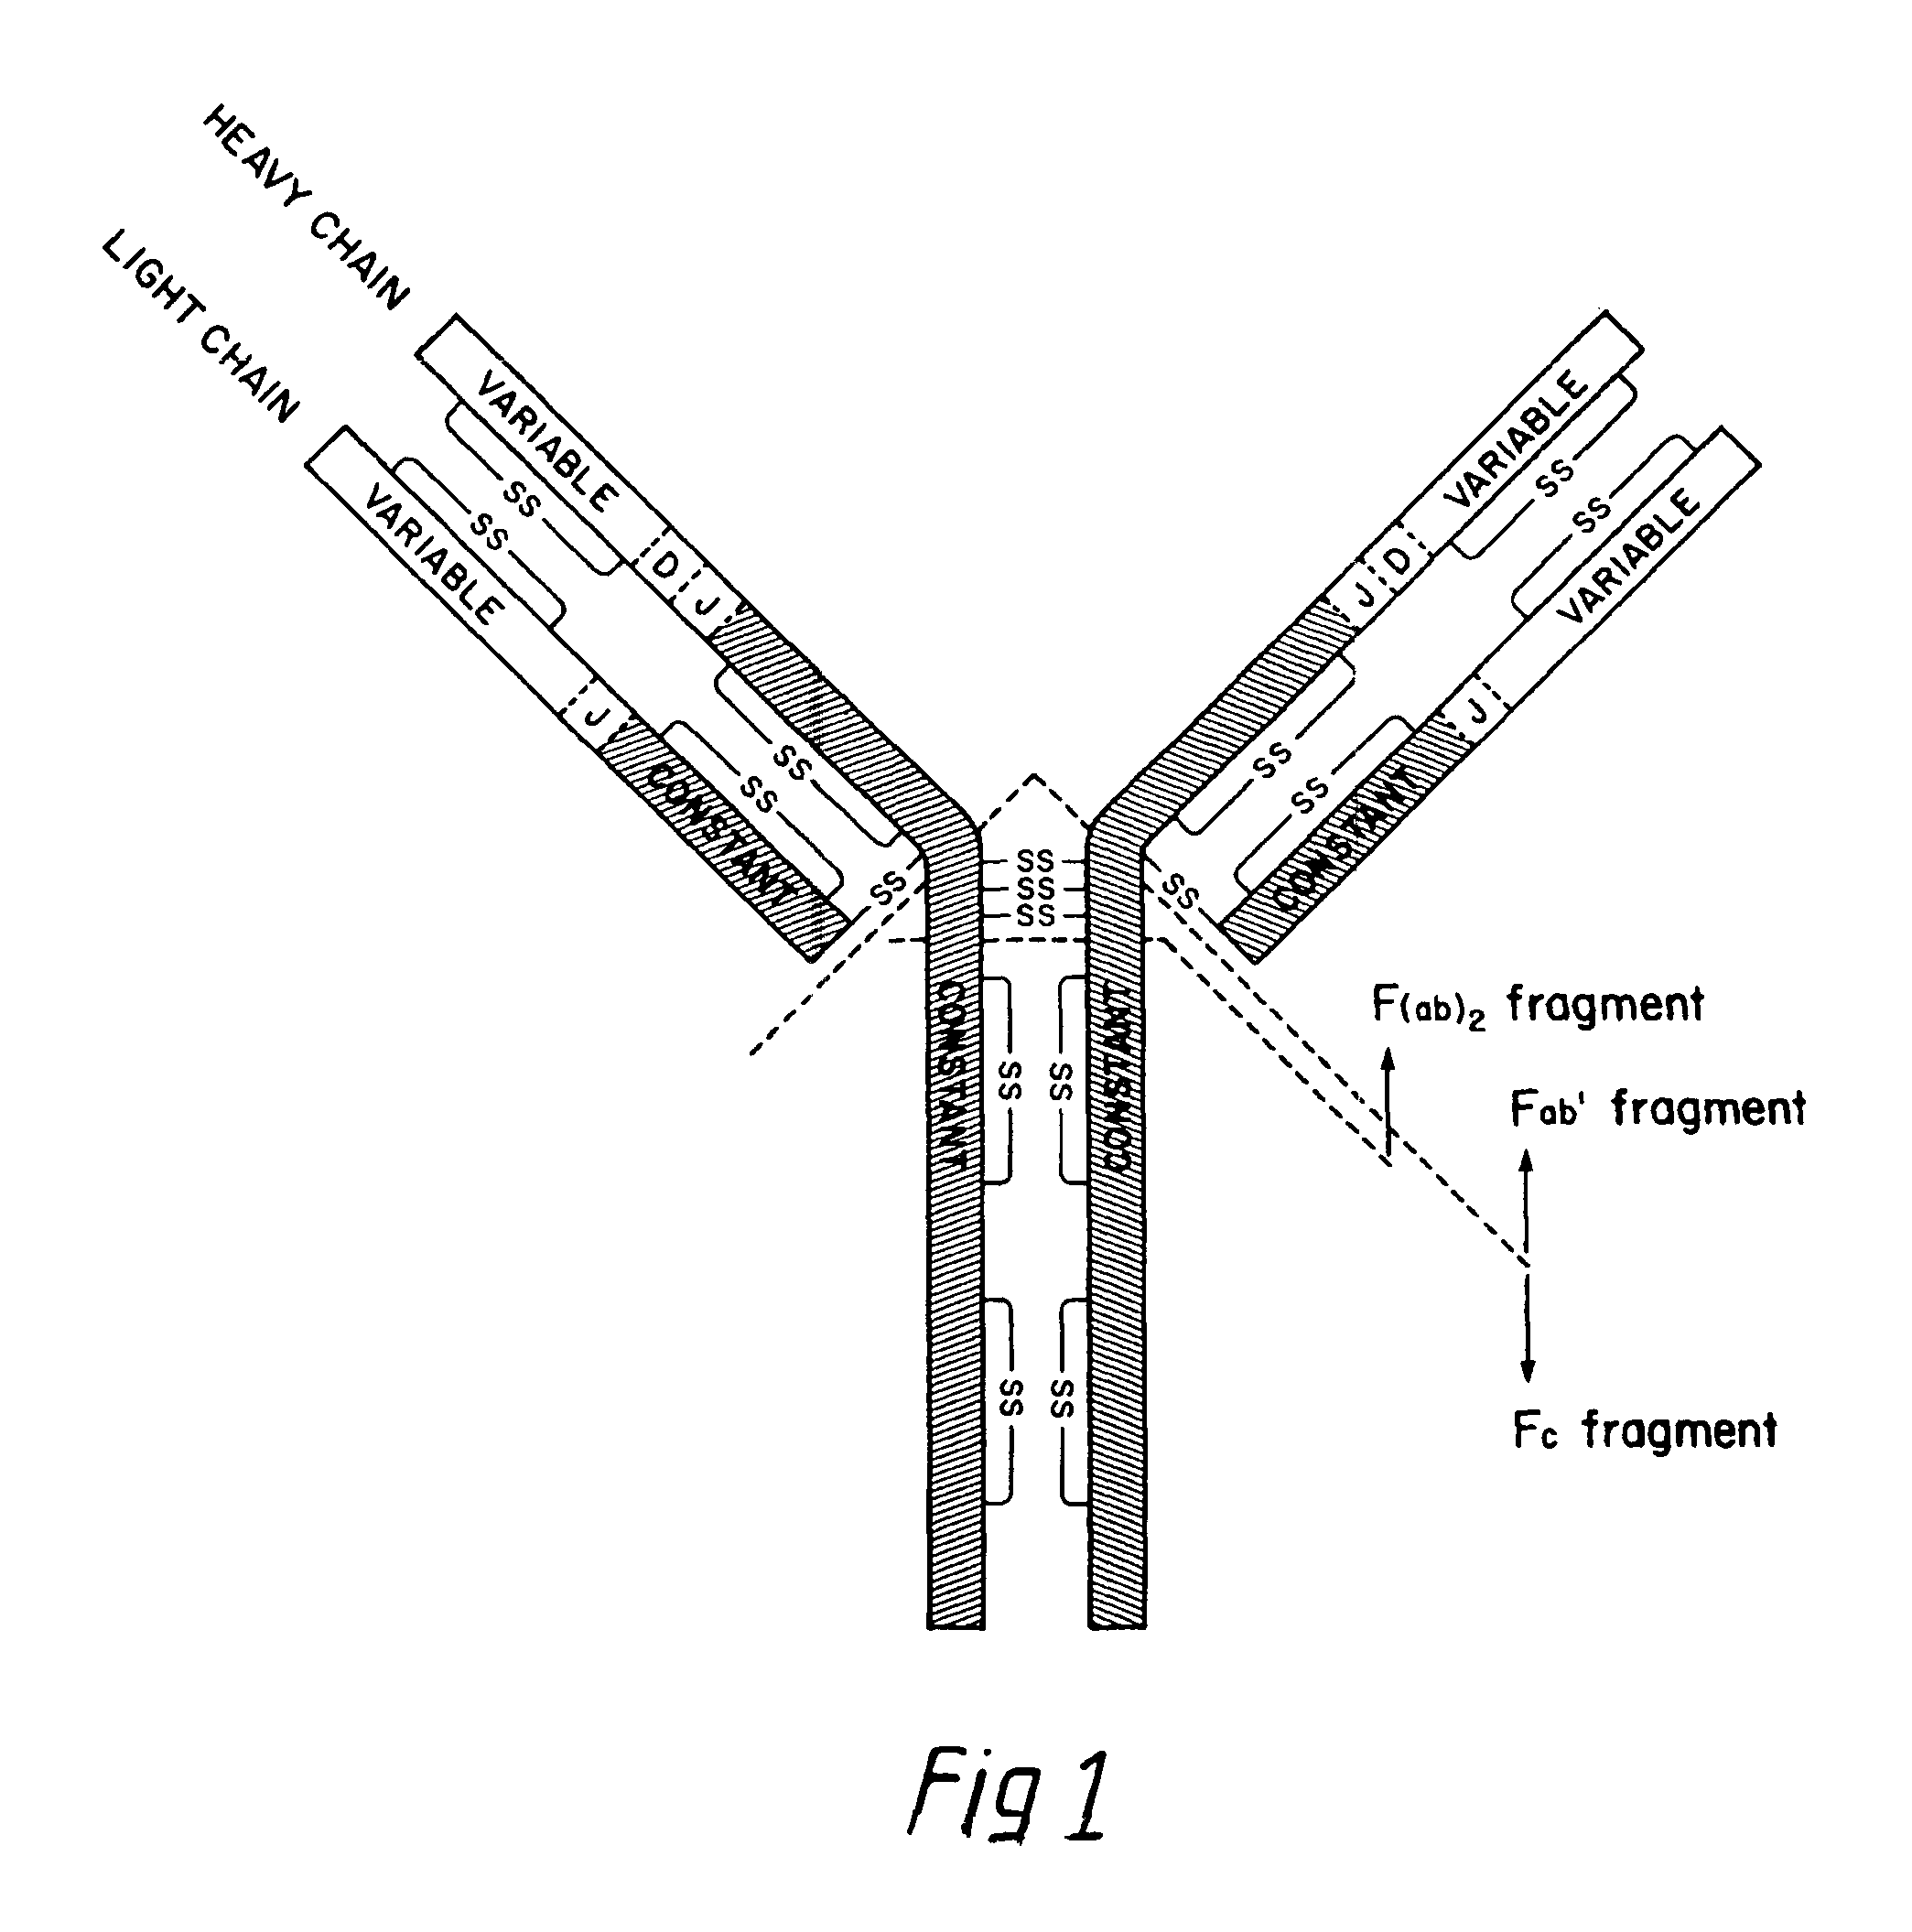 Methods of making antibody heavy and light chains having specificity for a desired antigen